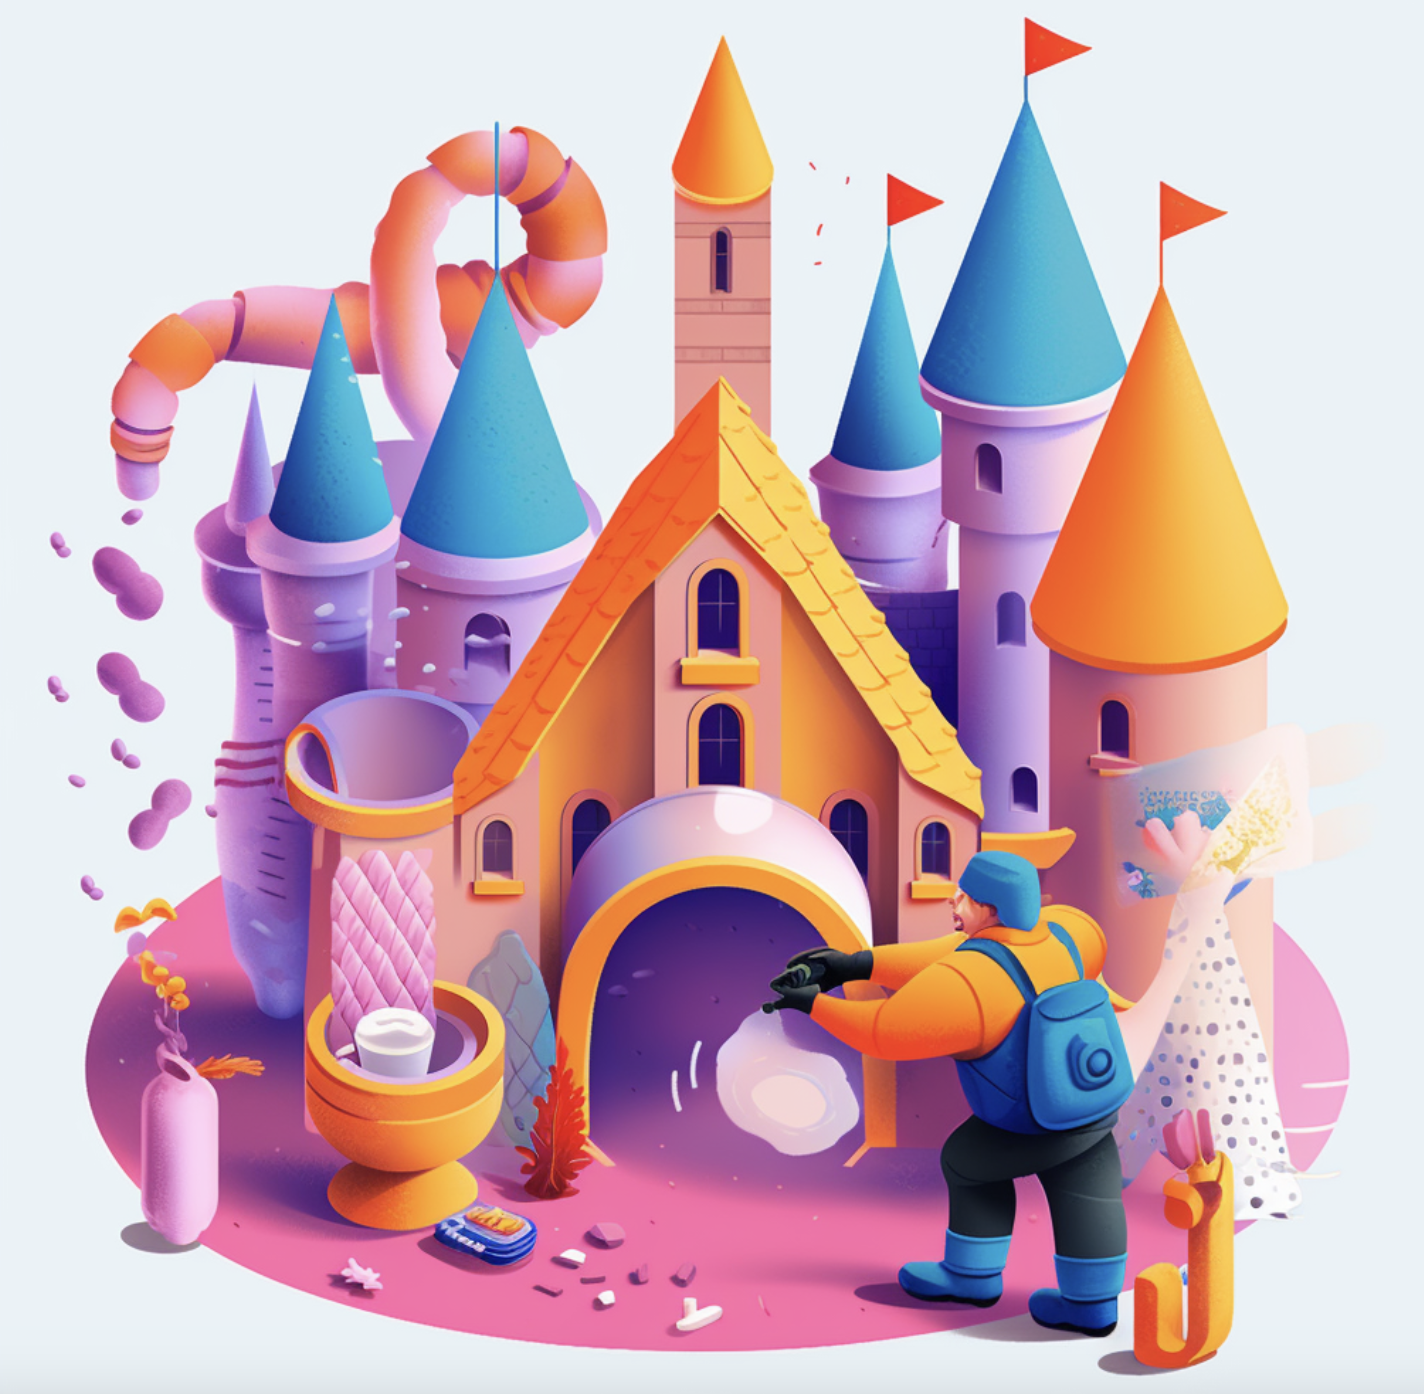 A Step-By-Step Guide To Cleaning And Sanitizing Your Inflatable Castle